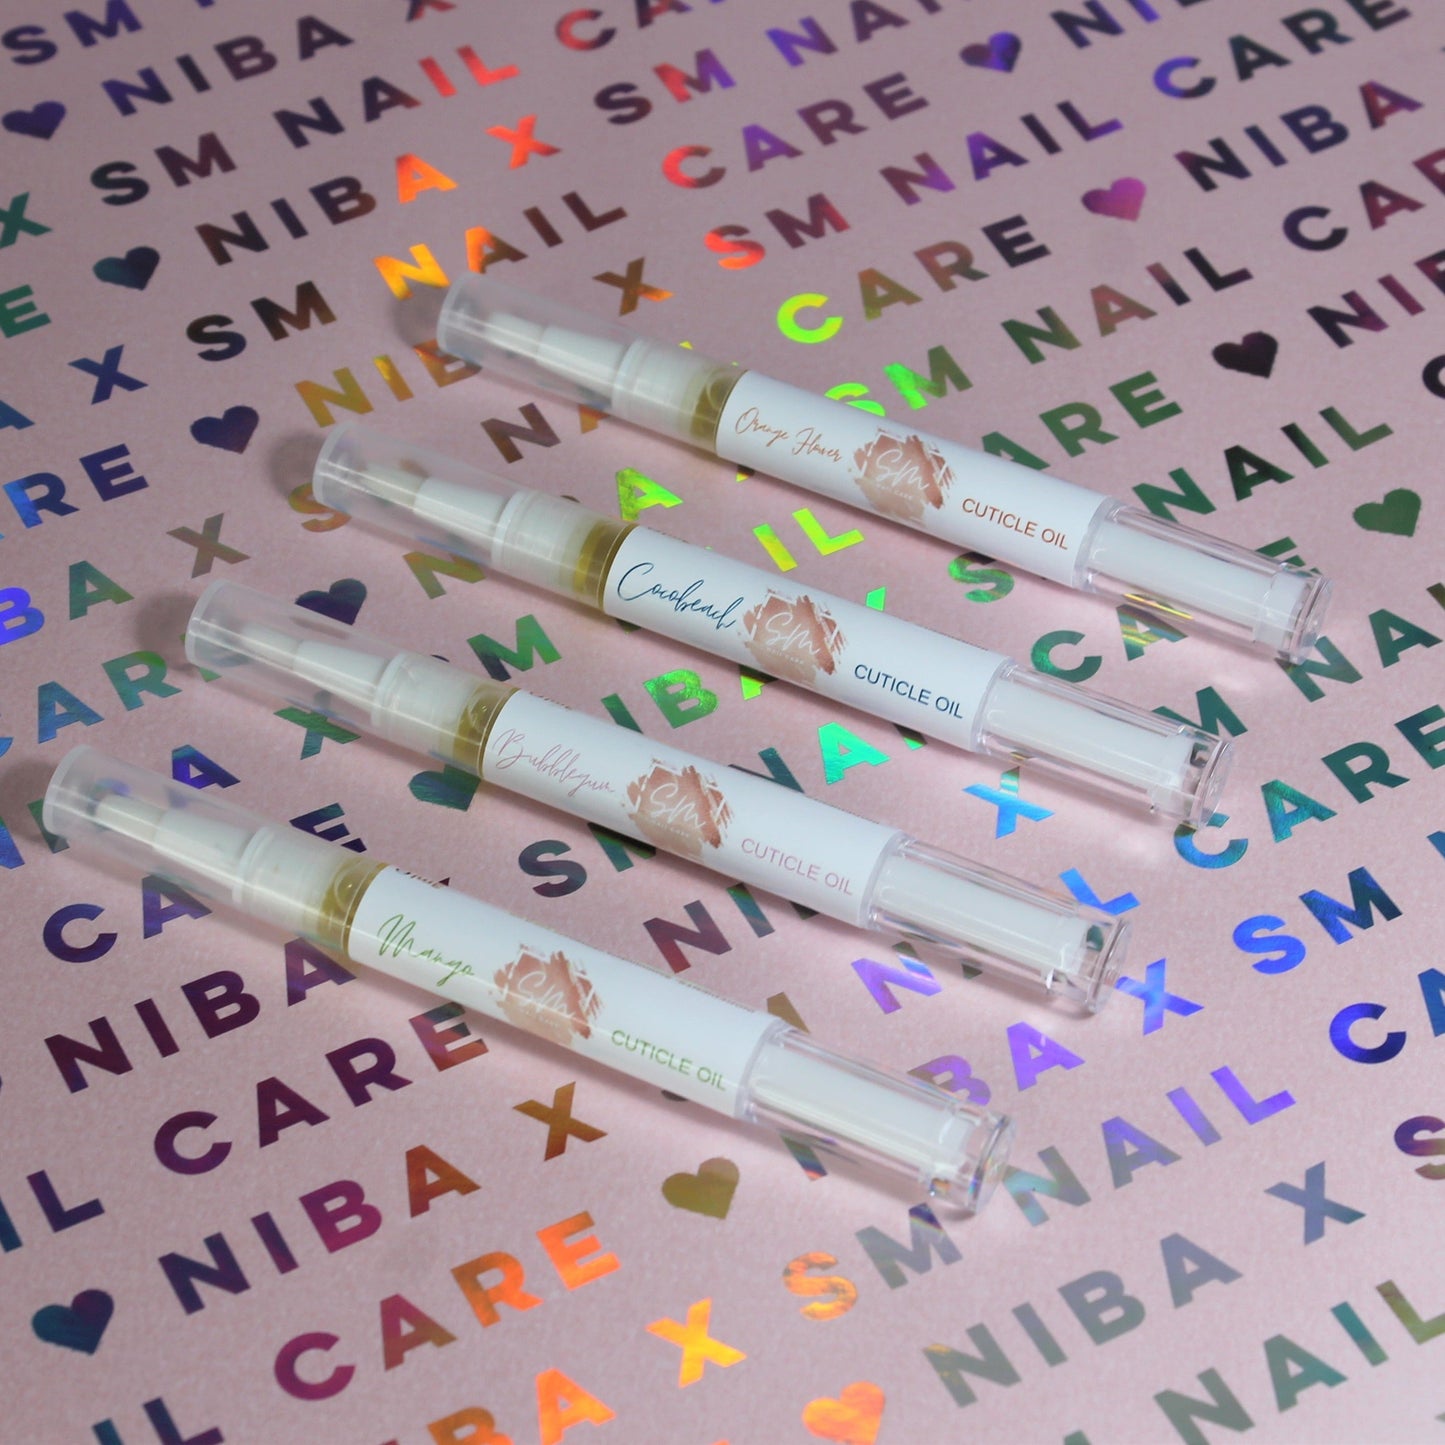 NIBA X Cuticle Oil Pen- Our product, your branding. - Niba Nail Care